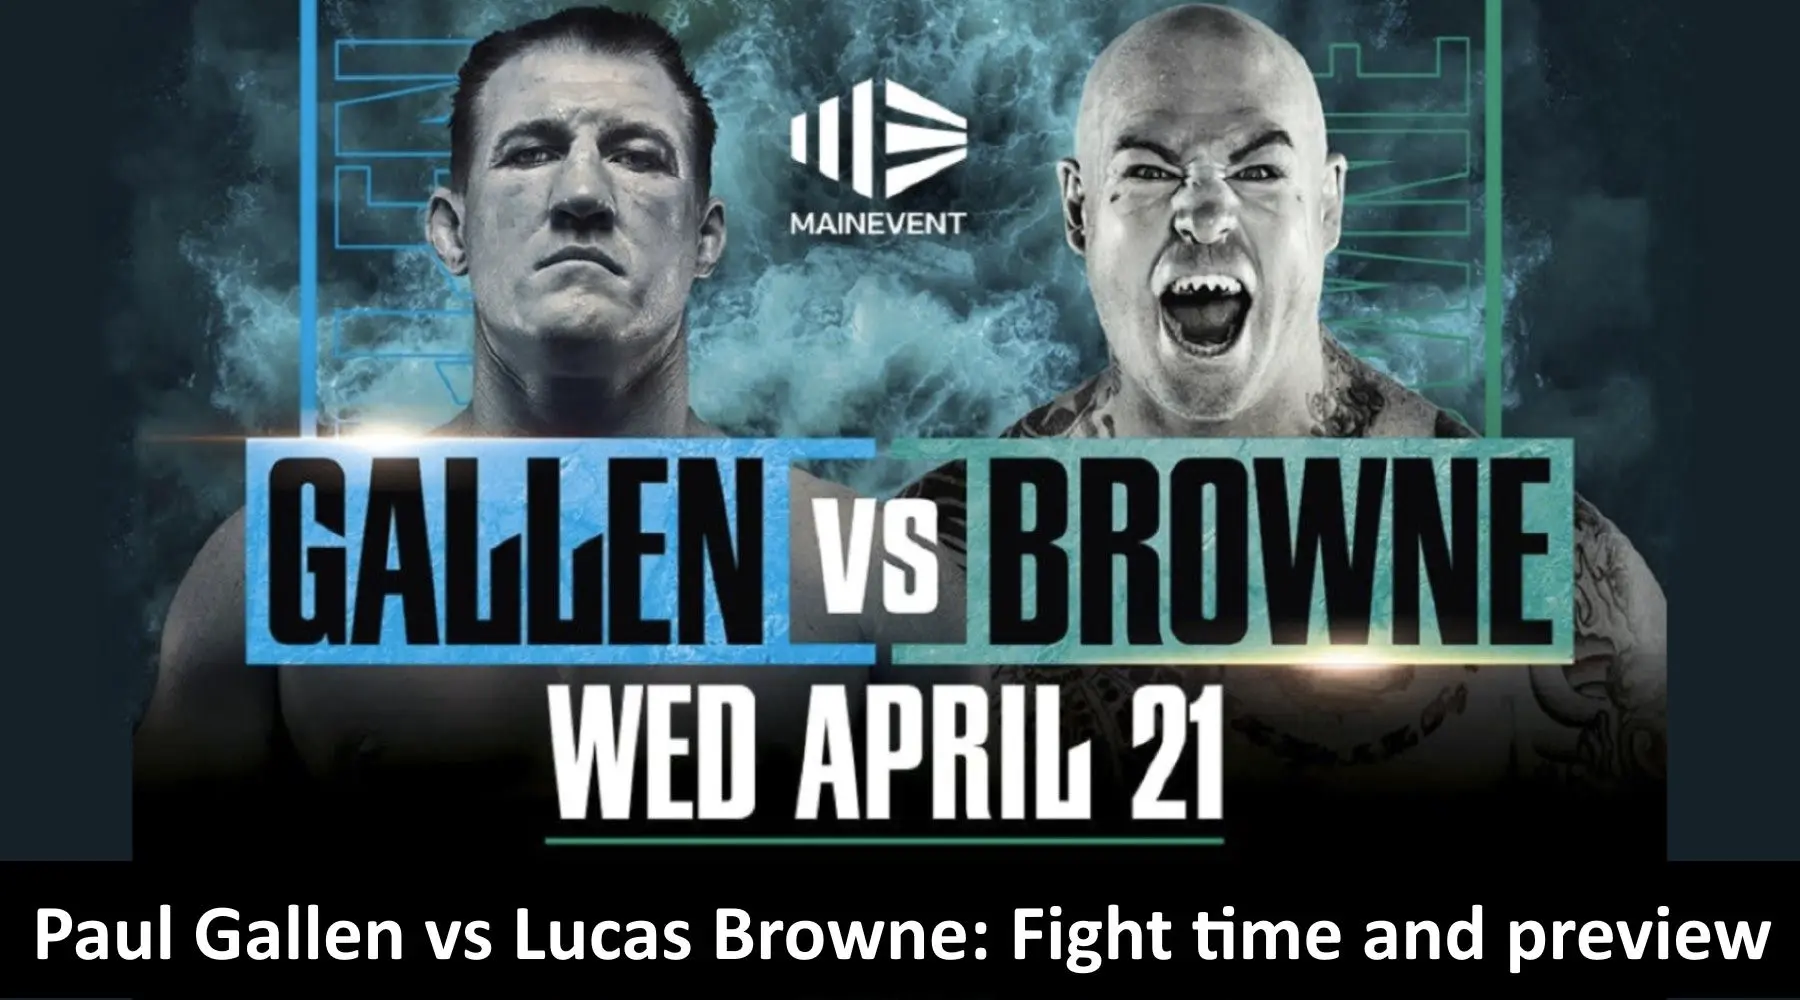 Watch Paul Gallen vs Lucas Browne boxing live online and start times